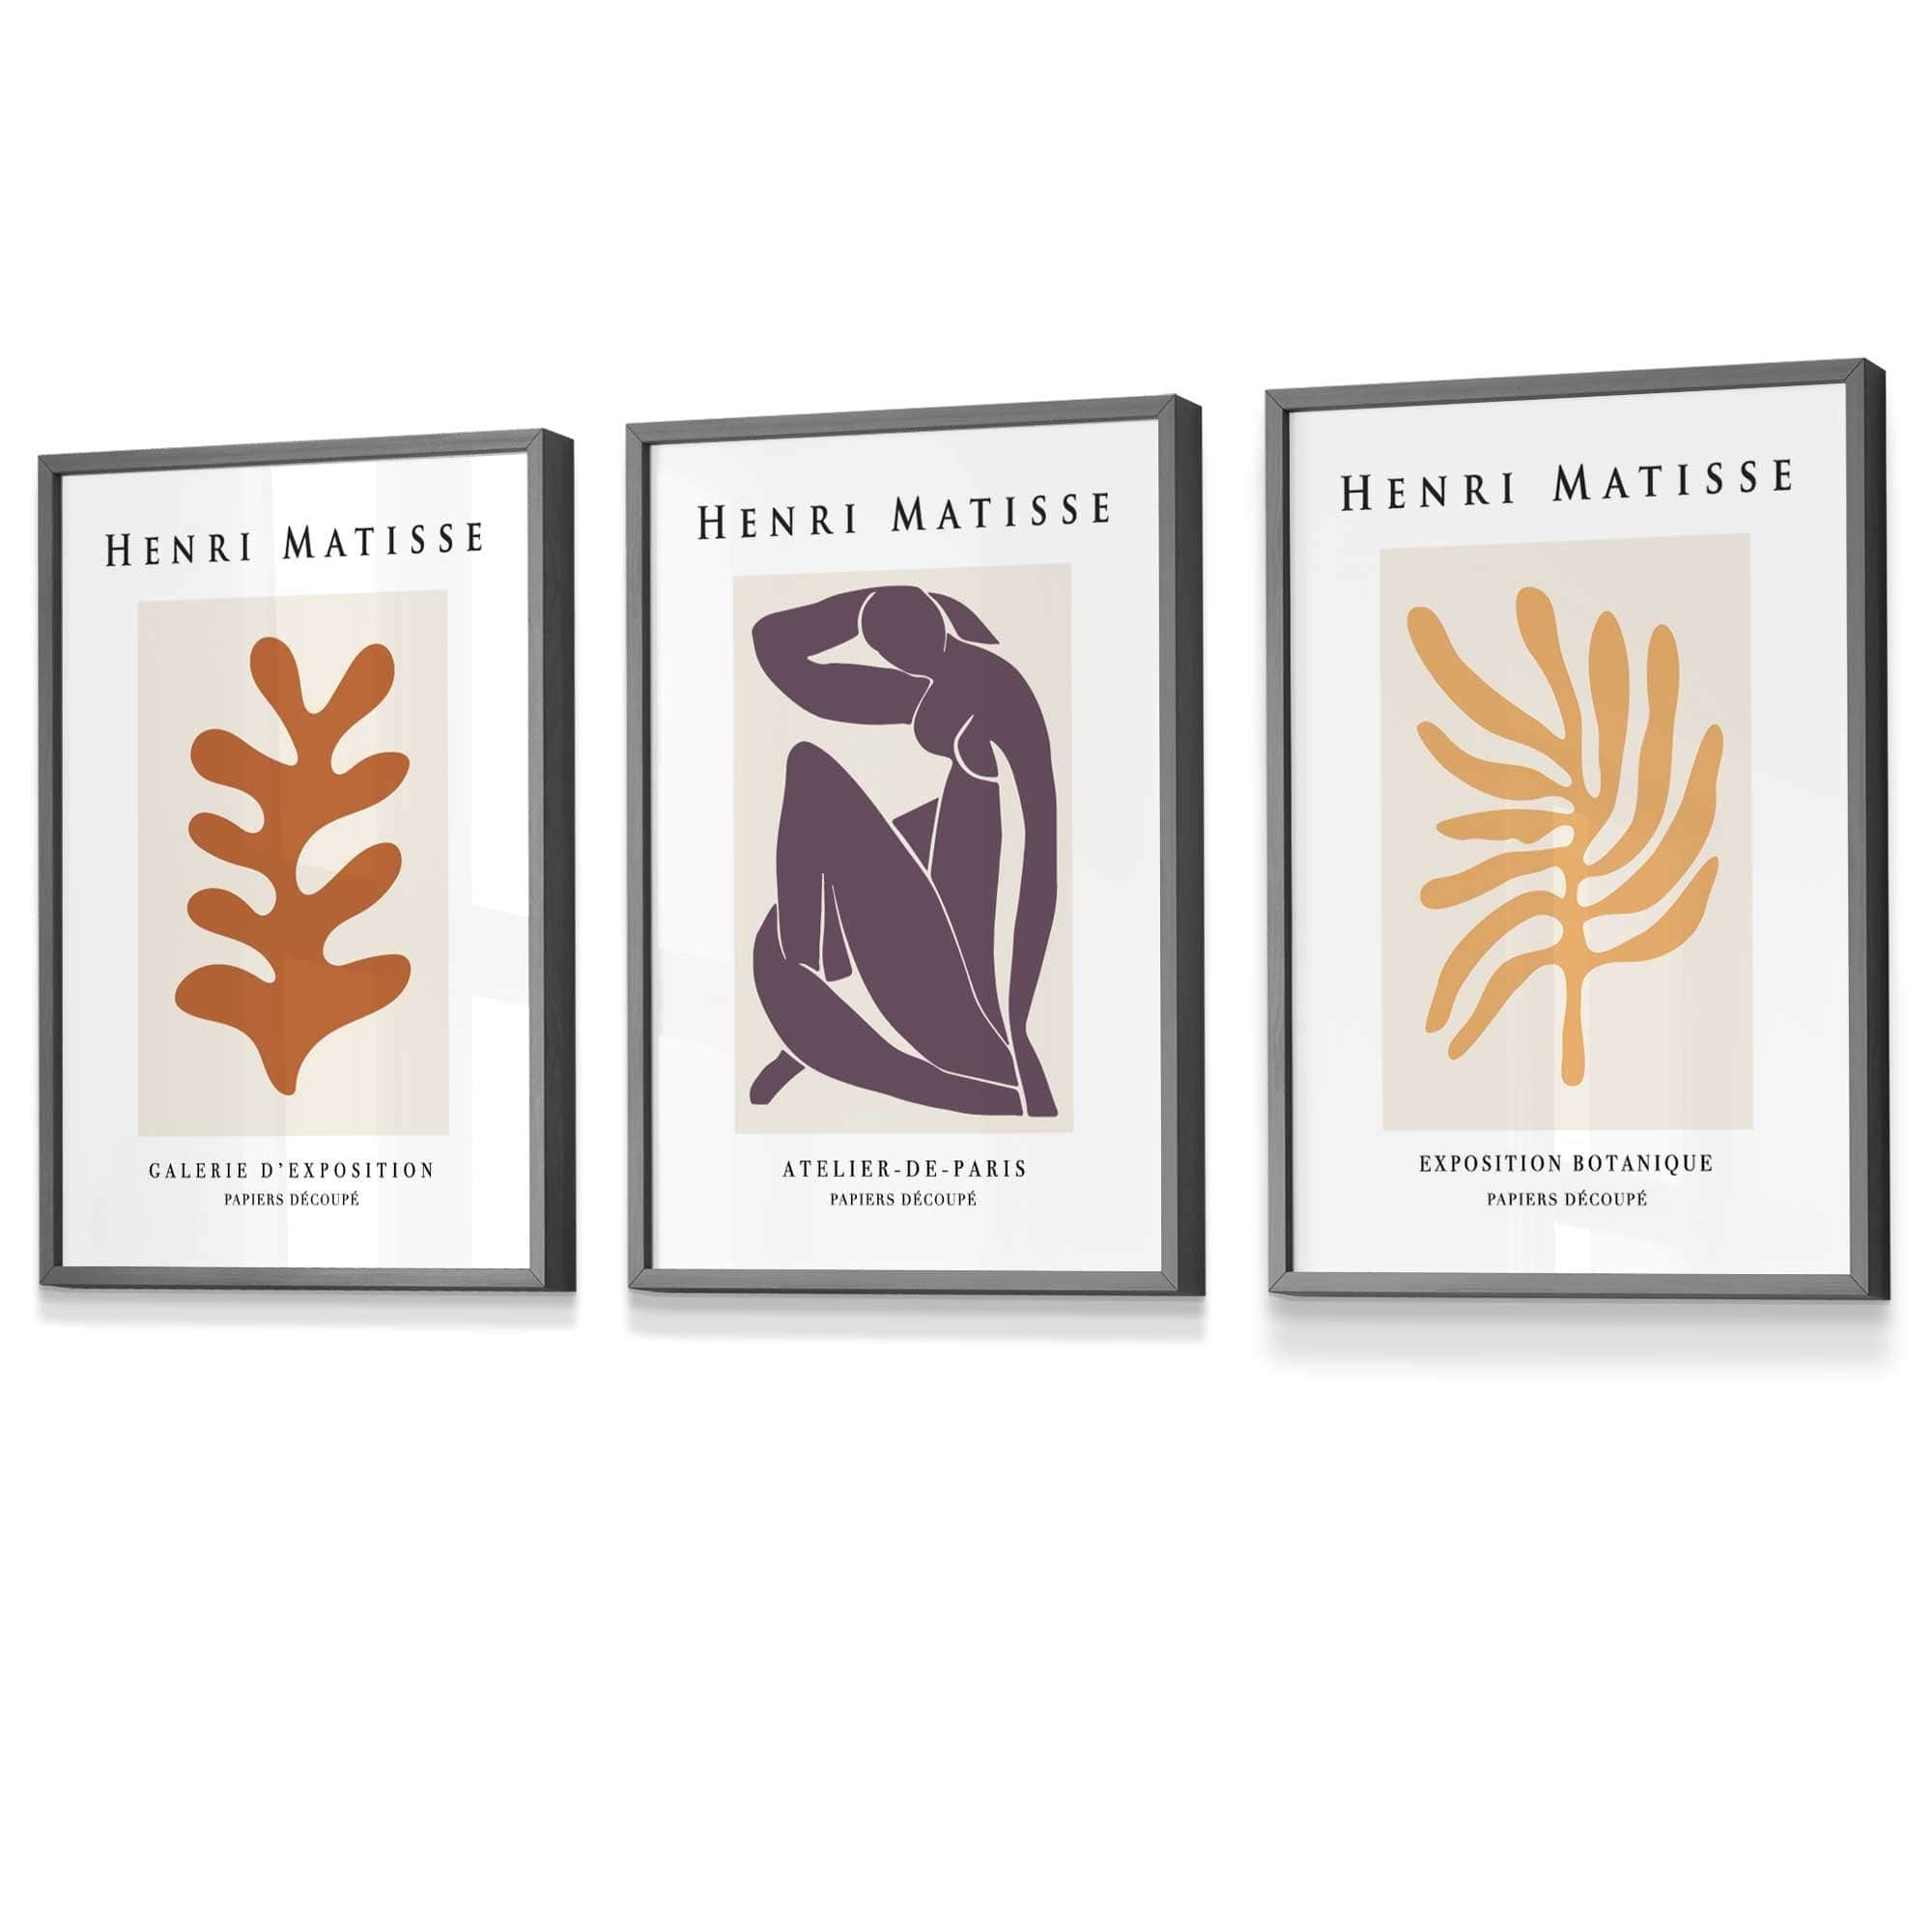 Matisse Floral and Nude Set of 3 FRAMED Wall Art Prints in Purple, Orange and Yellow Henri Matisse Cutouts Mid Century Modern